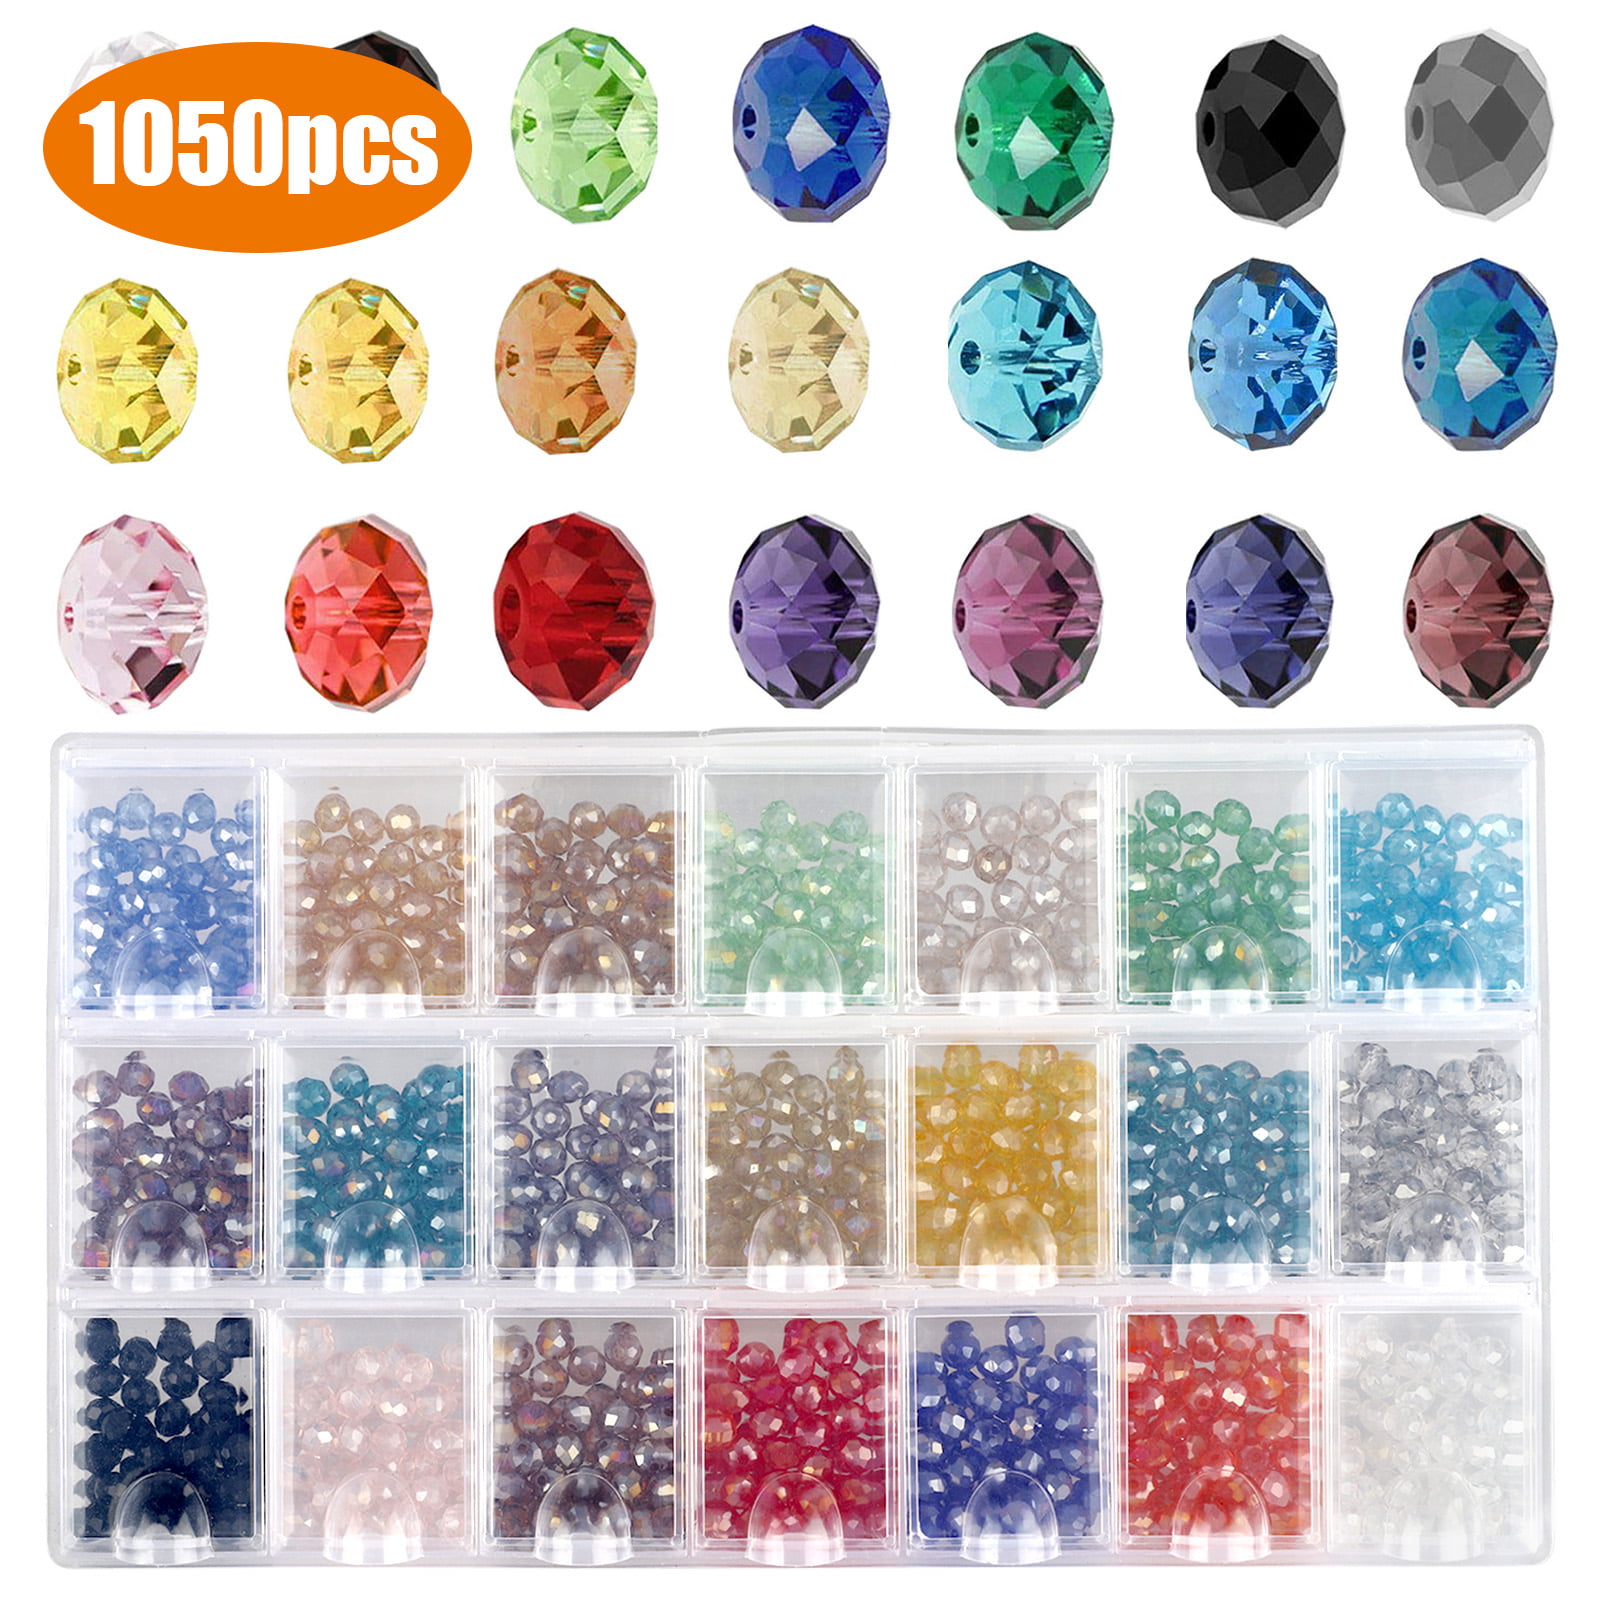 4--12 mm "AB‘ color glass Colorful loose round beads diy jewelry Making 